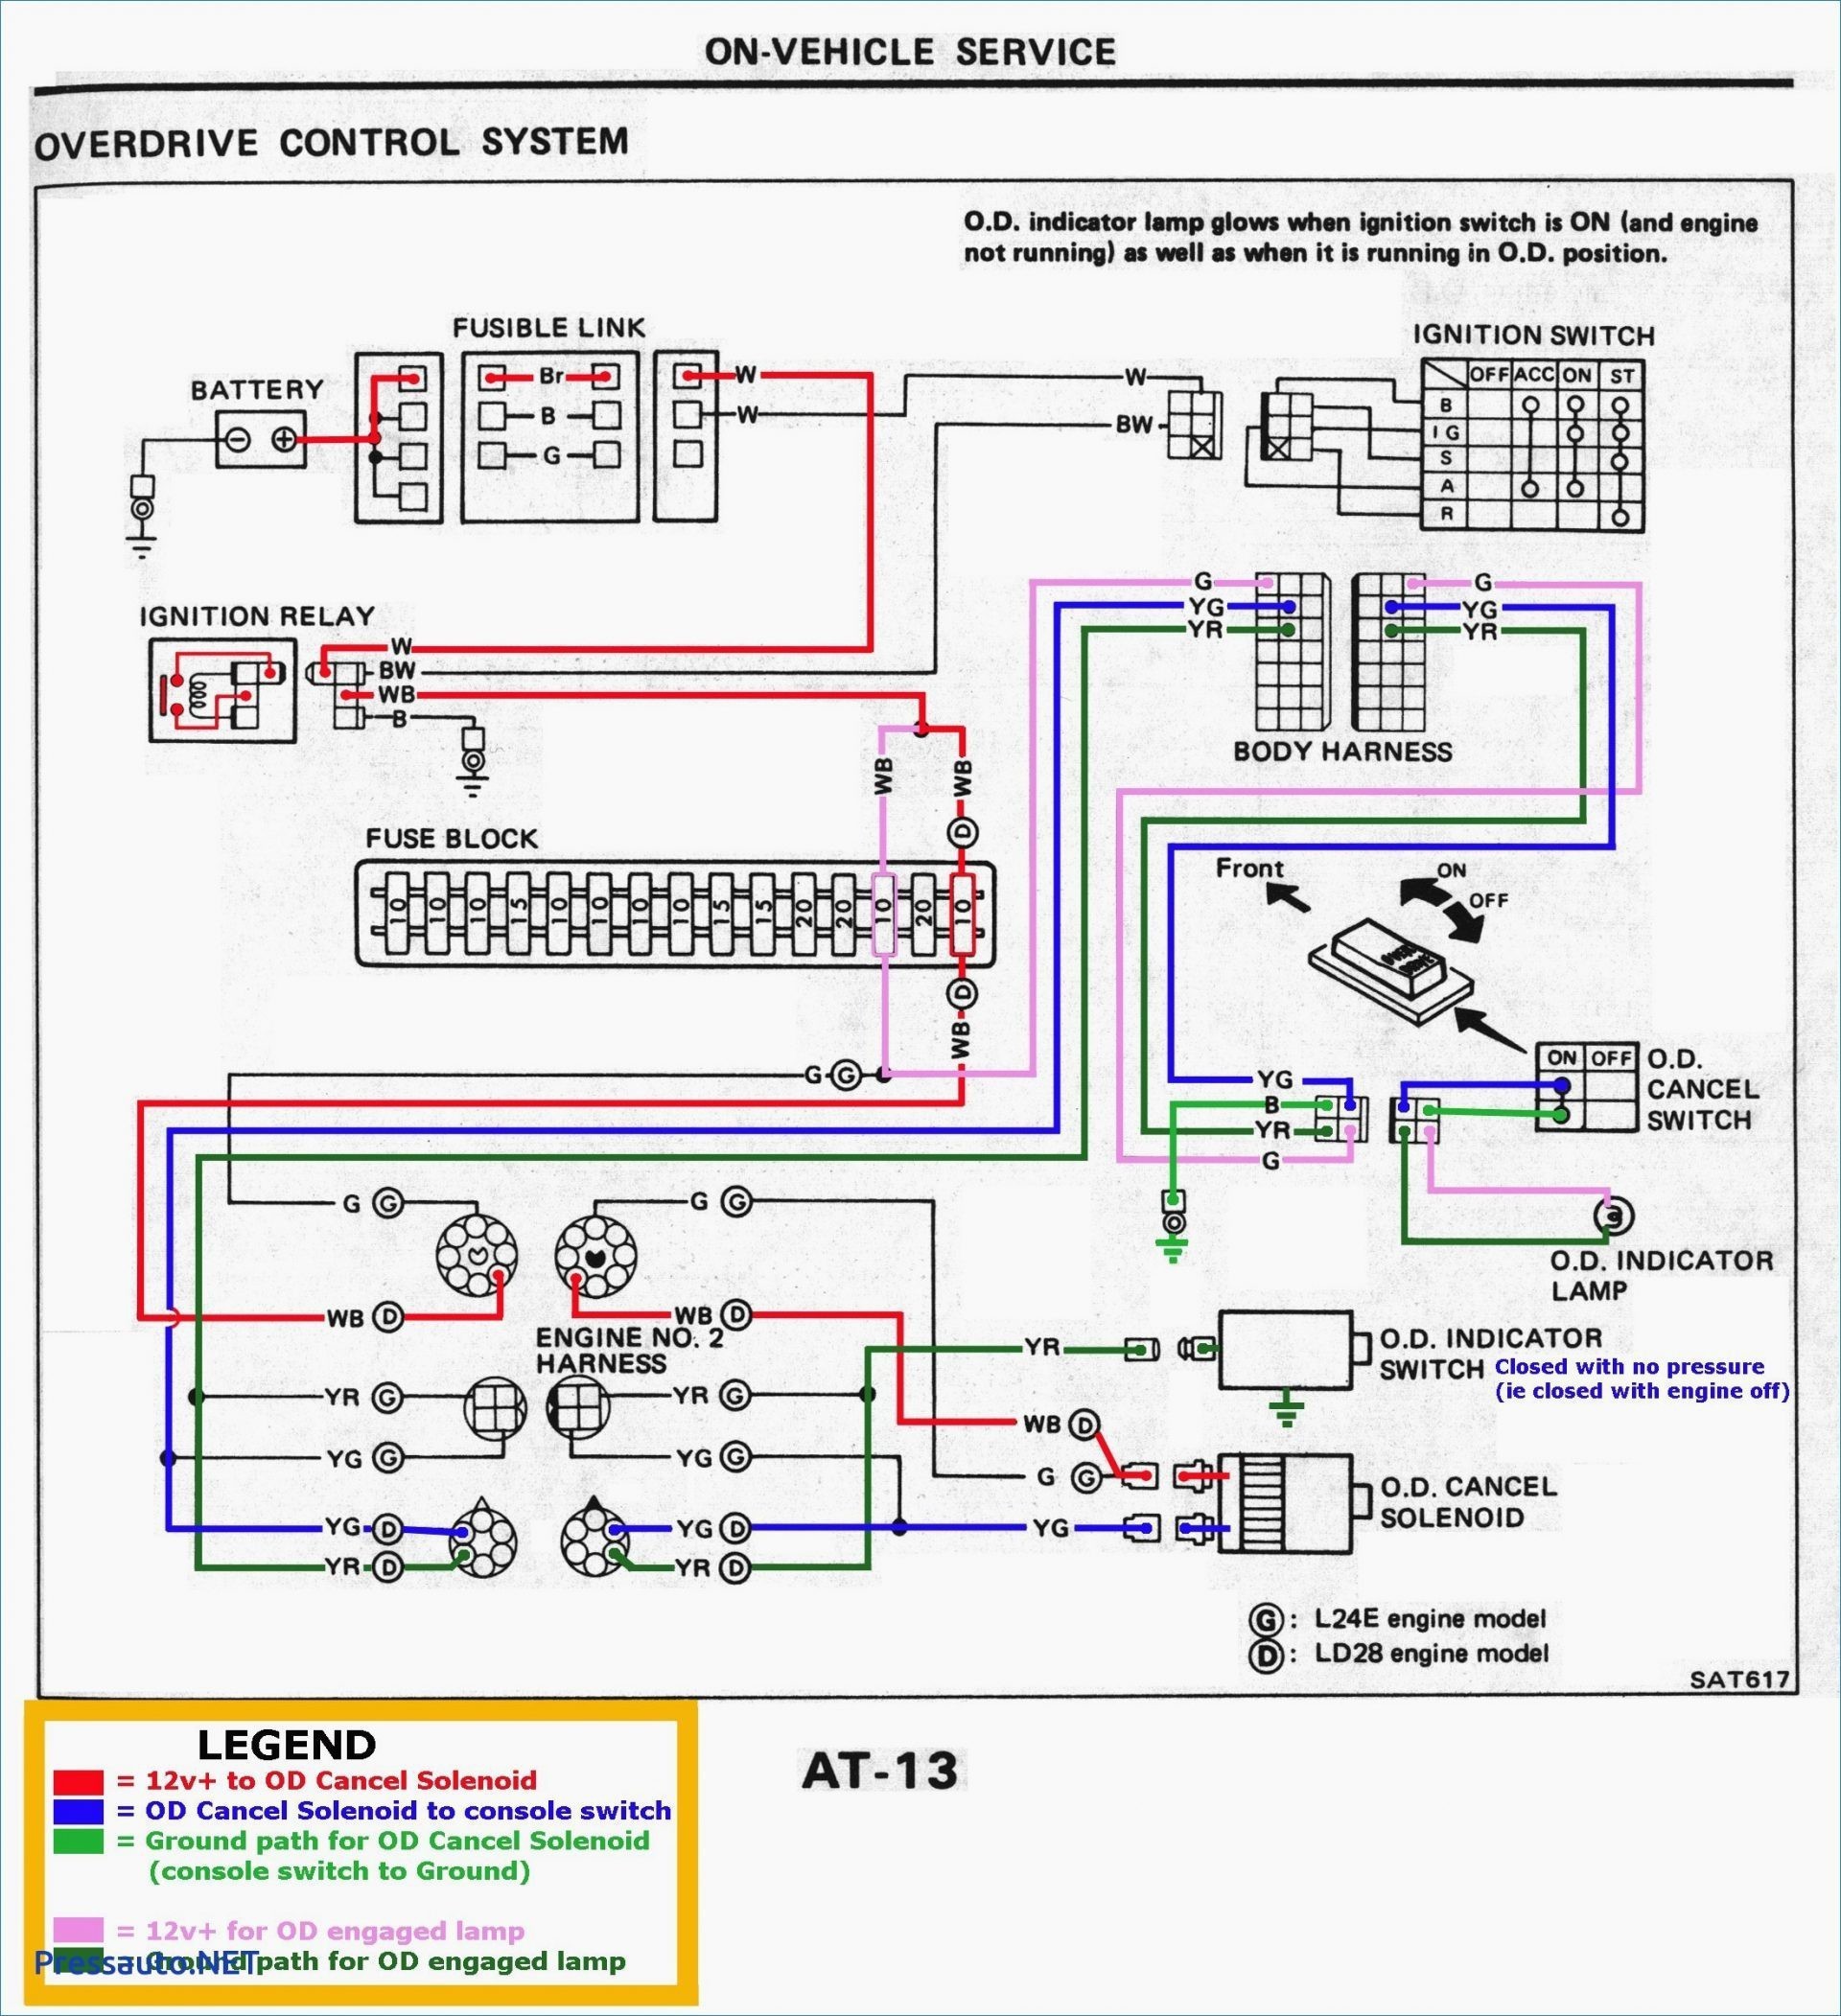 Wiring Diagram For Seven Way Trailer Plug New 2017 Wiring Diagram For Rv Trailer Plug Joescablecar